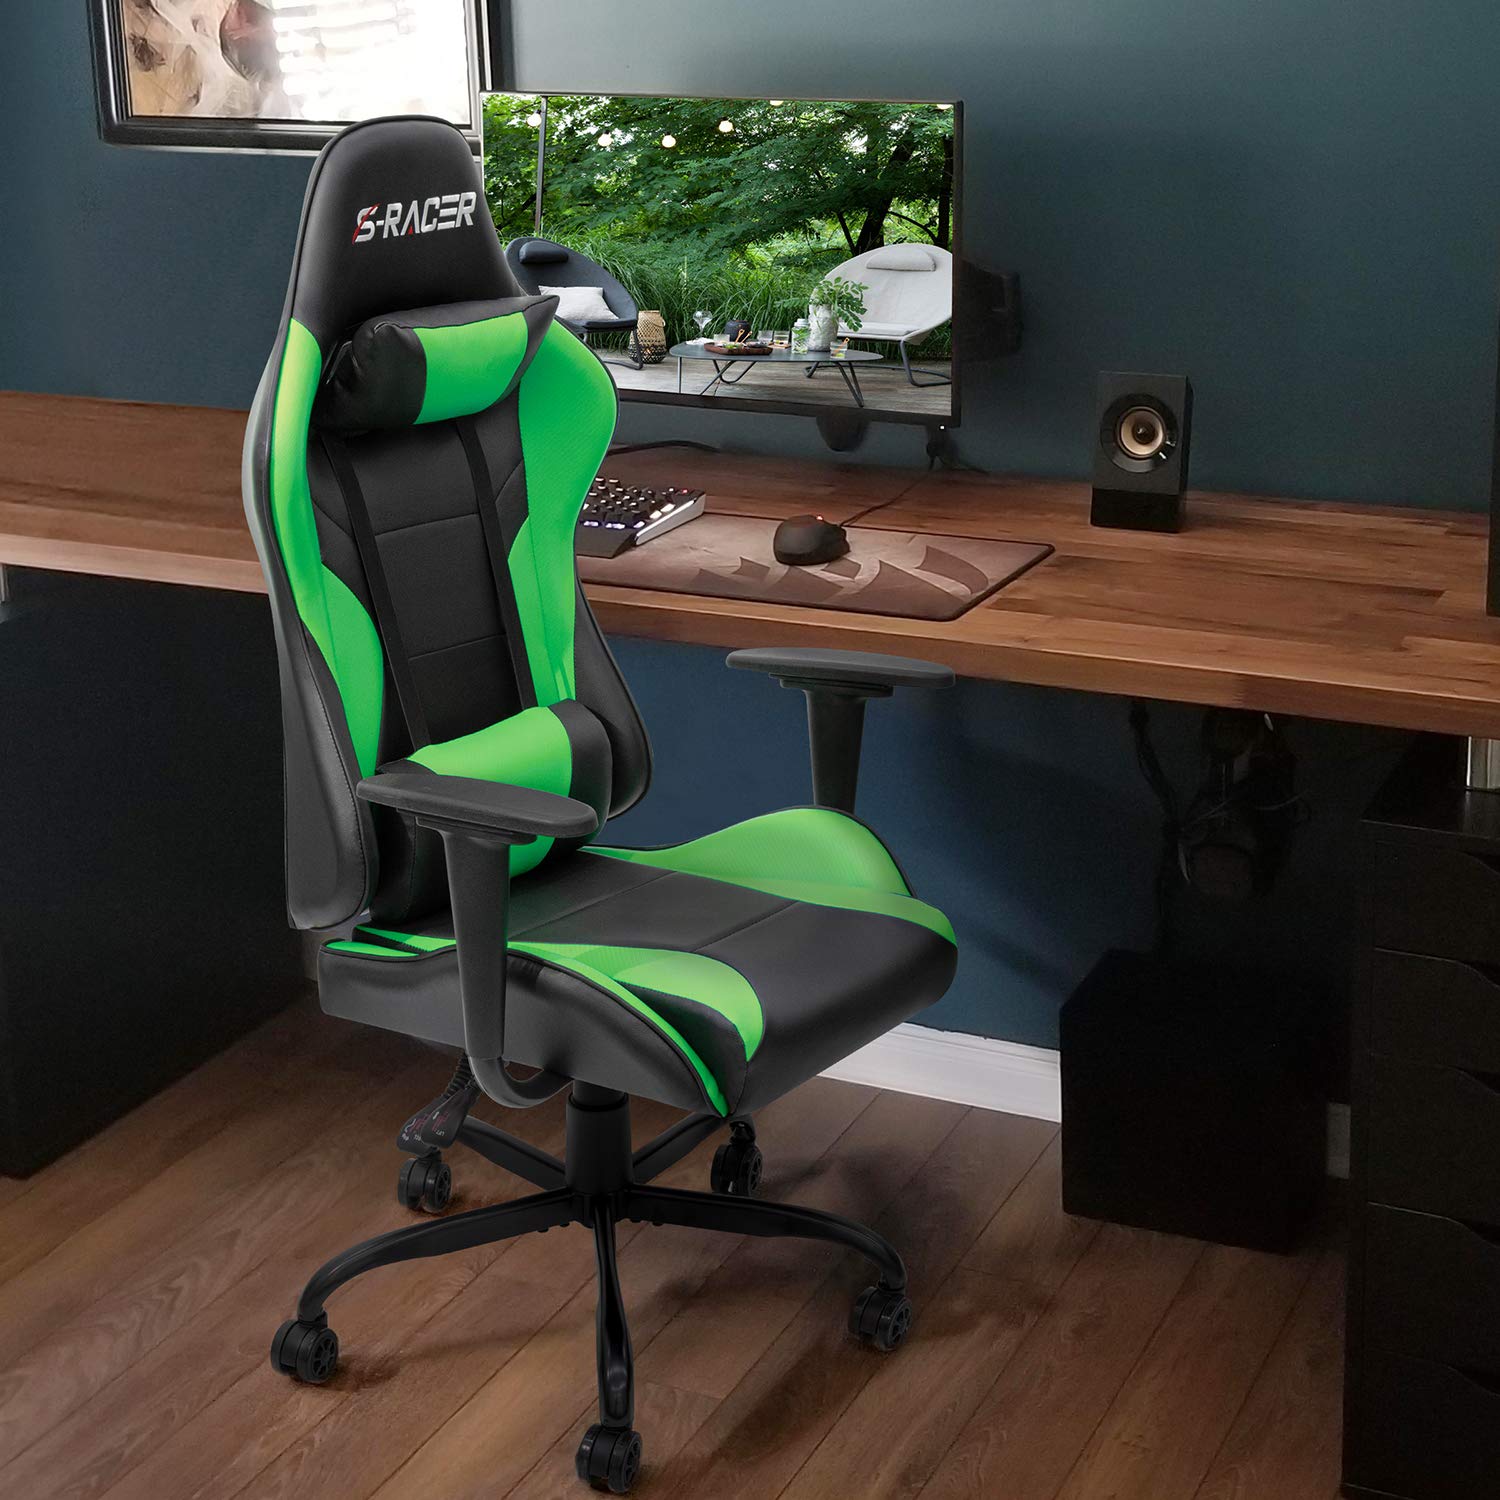 Lacoo Gaming Chair PU Leather Reclining Racing Style Ergonomic Office Chair with Headrest and Lumbar Support, Green - image 3 of 7